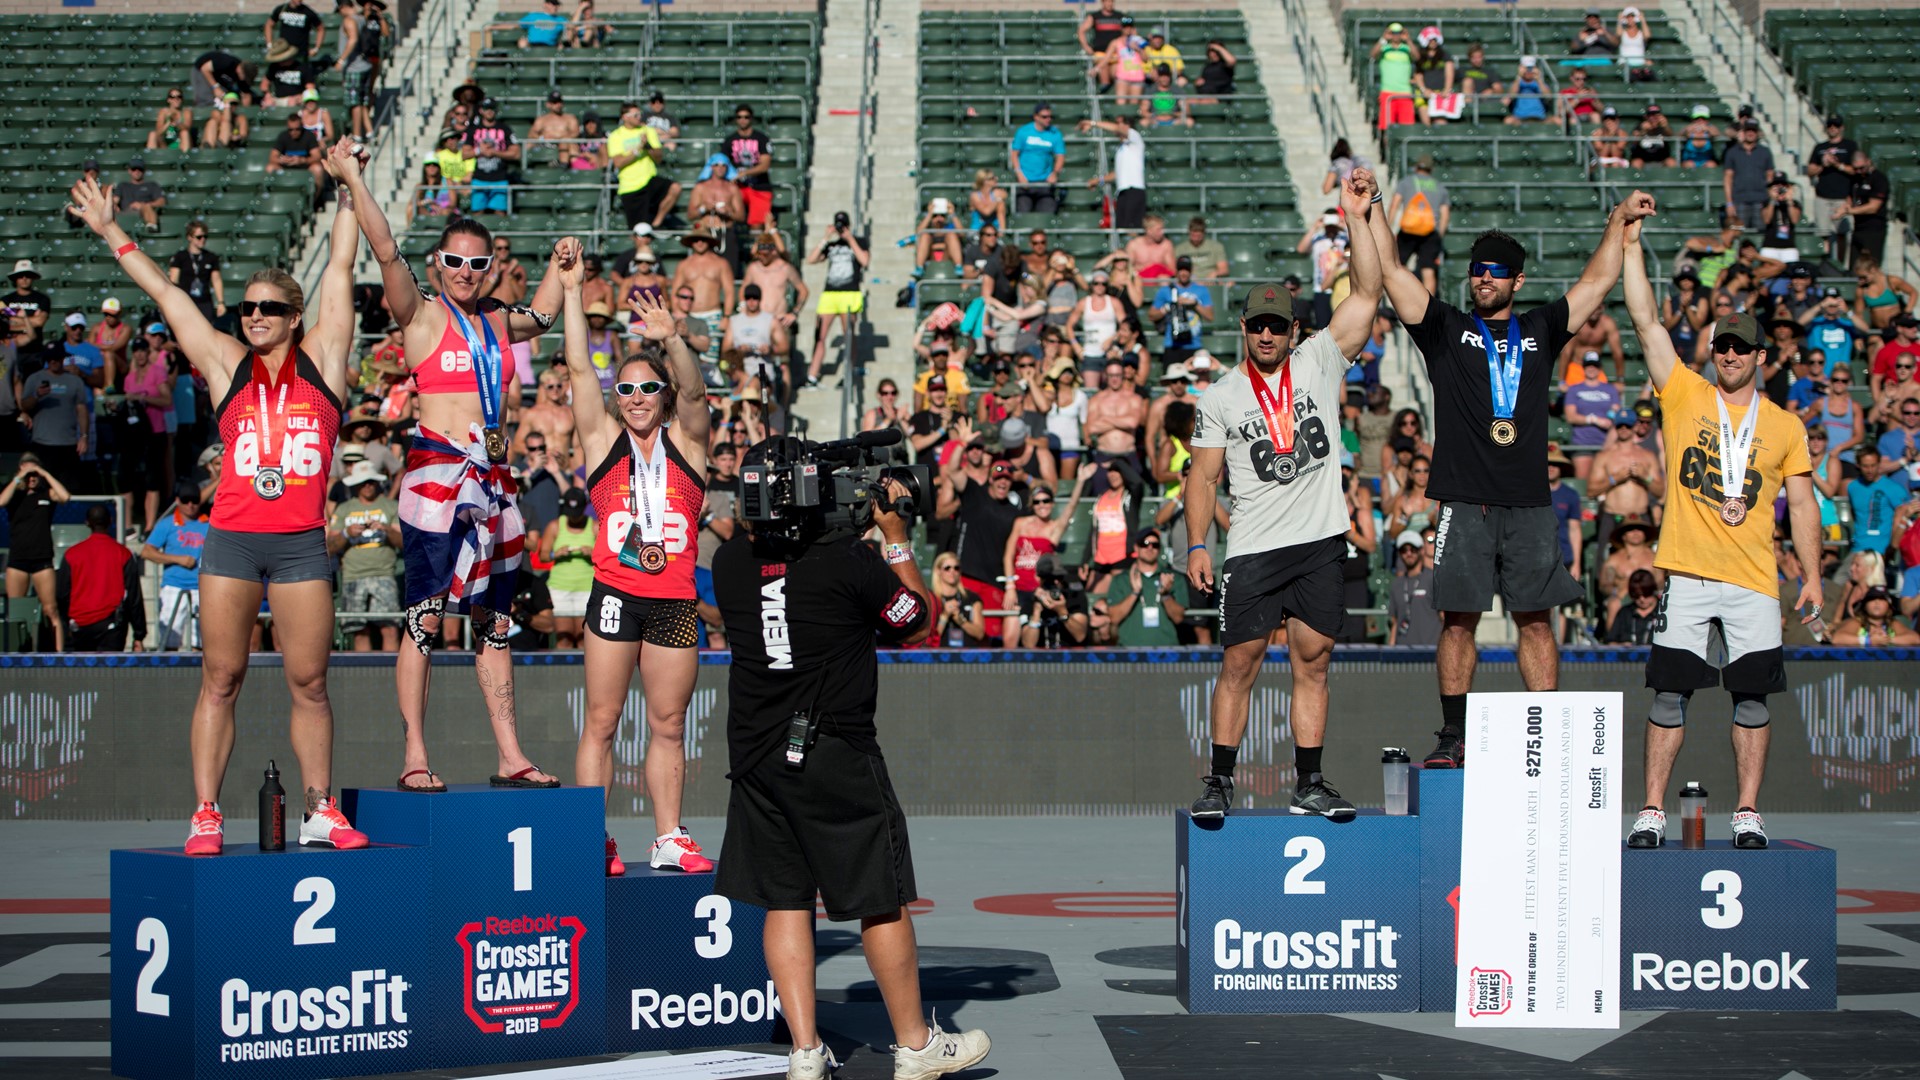 prize money for reebok crossfit games